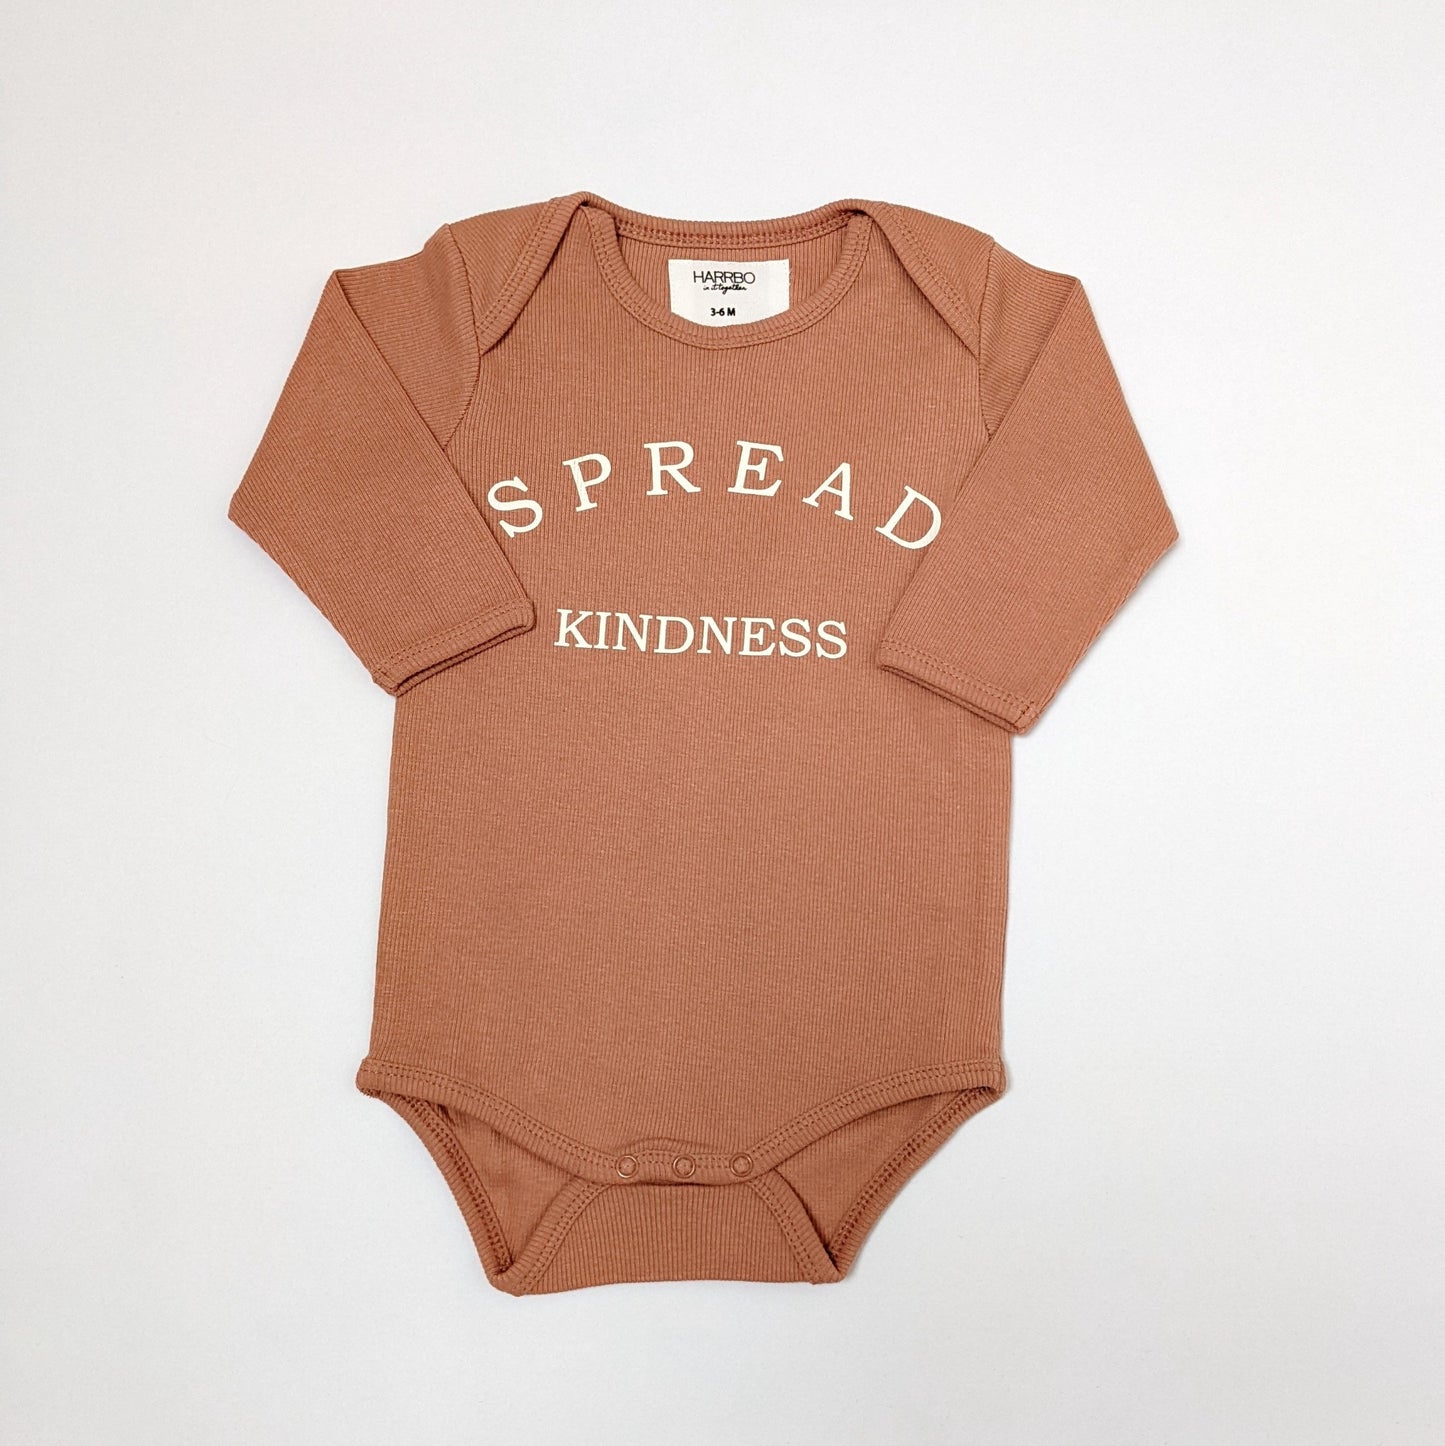 Spread kindness baby bodysuit in clay